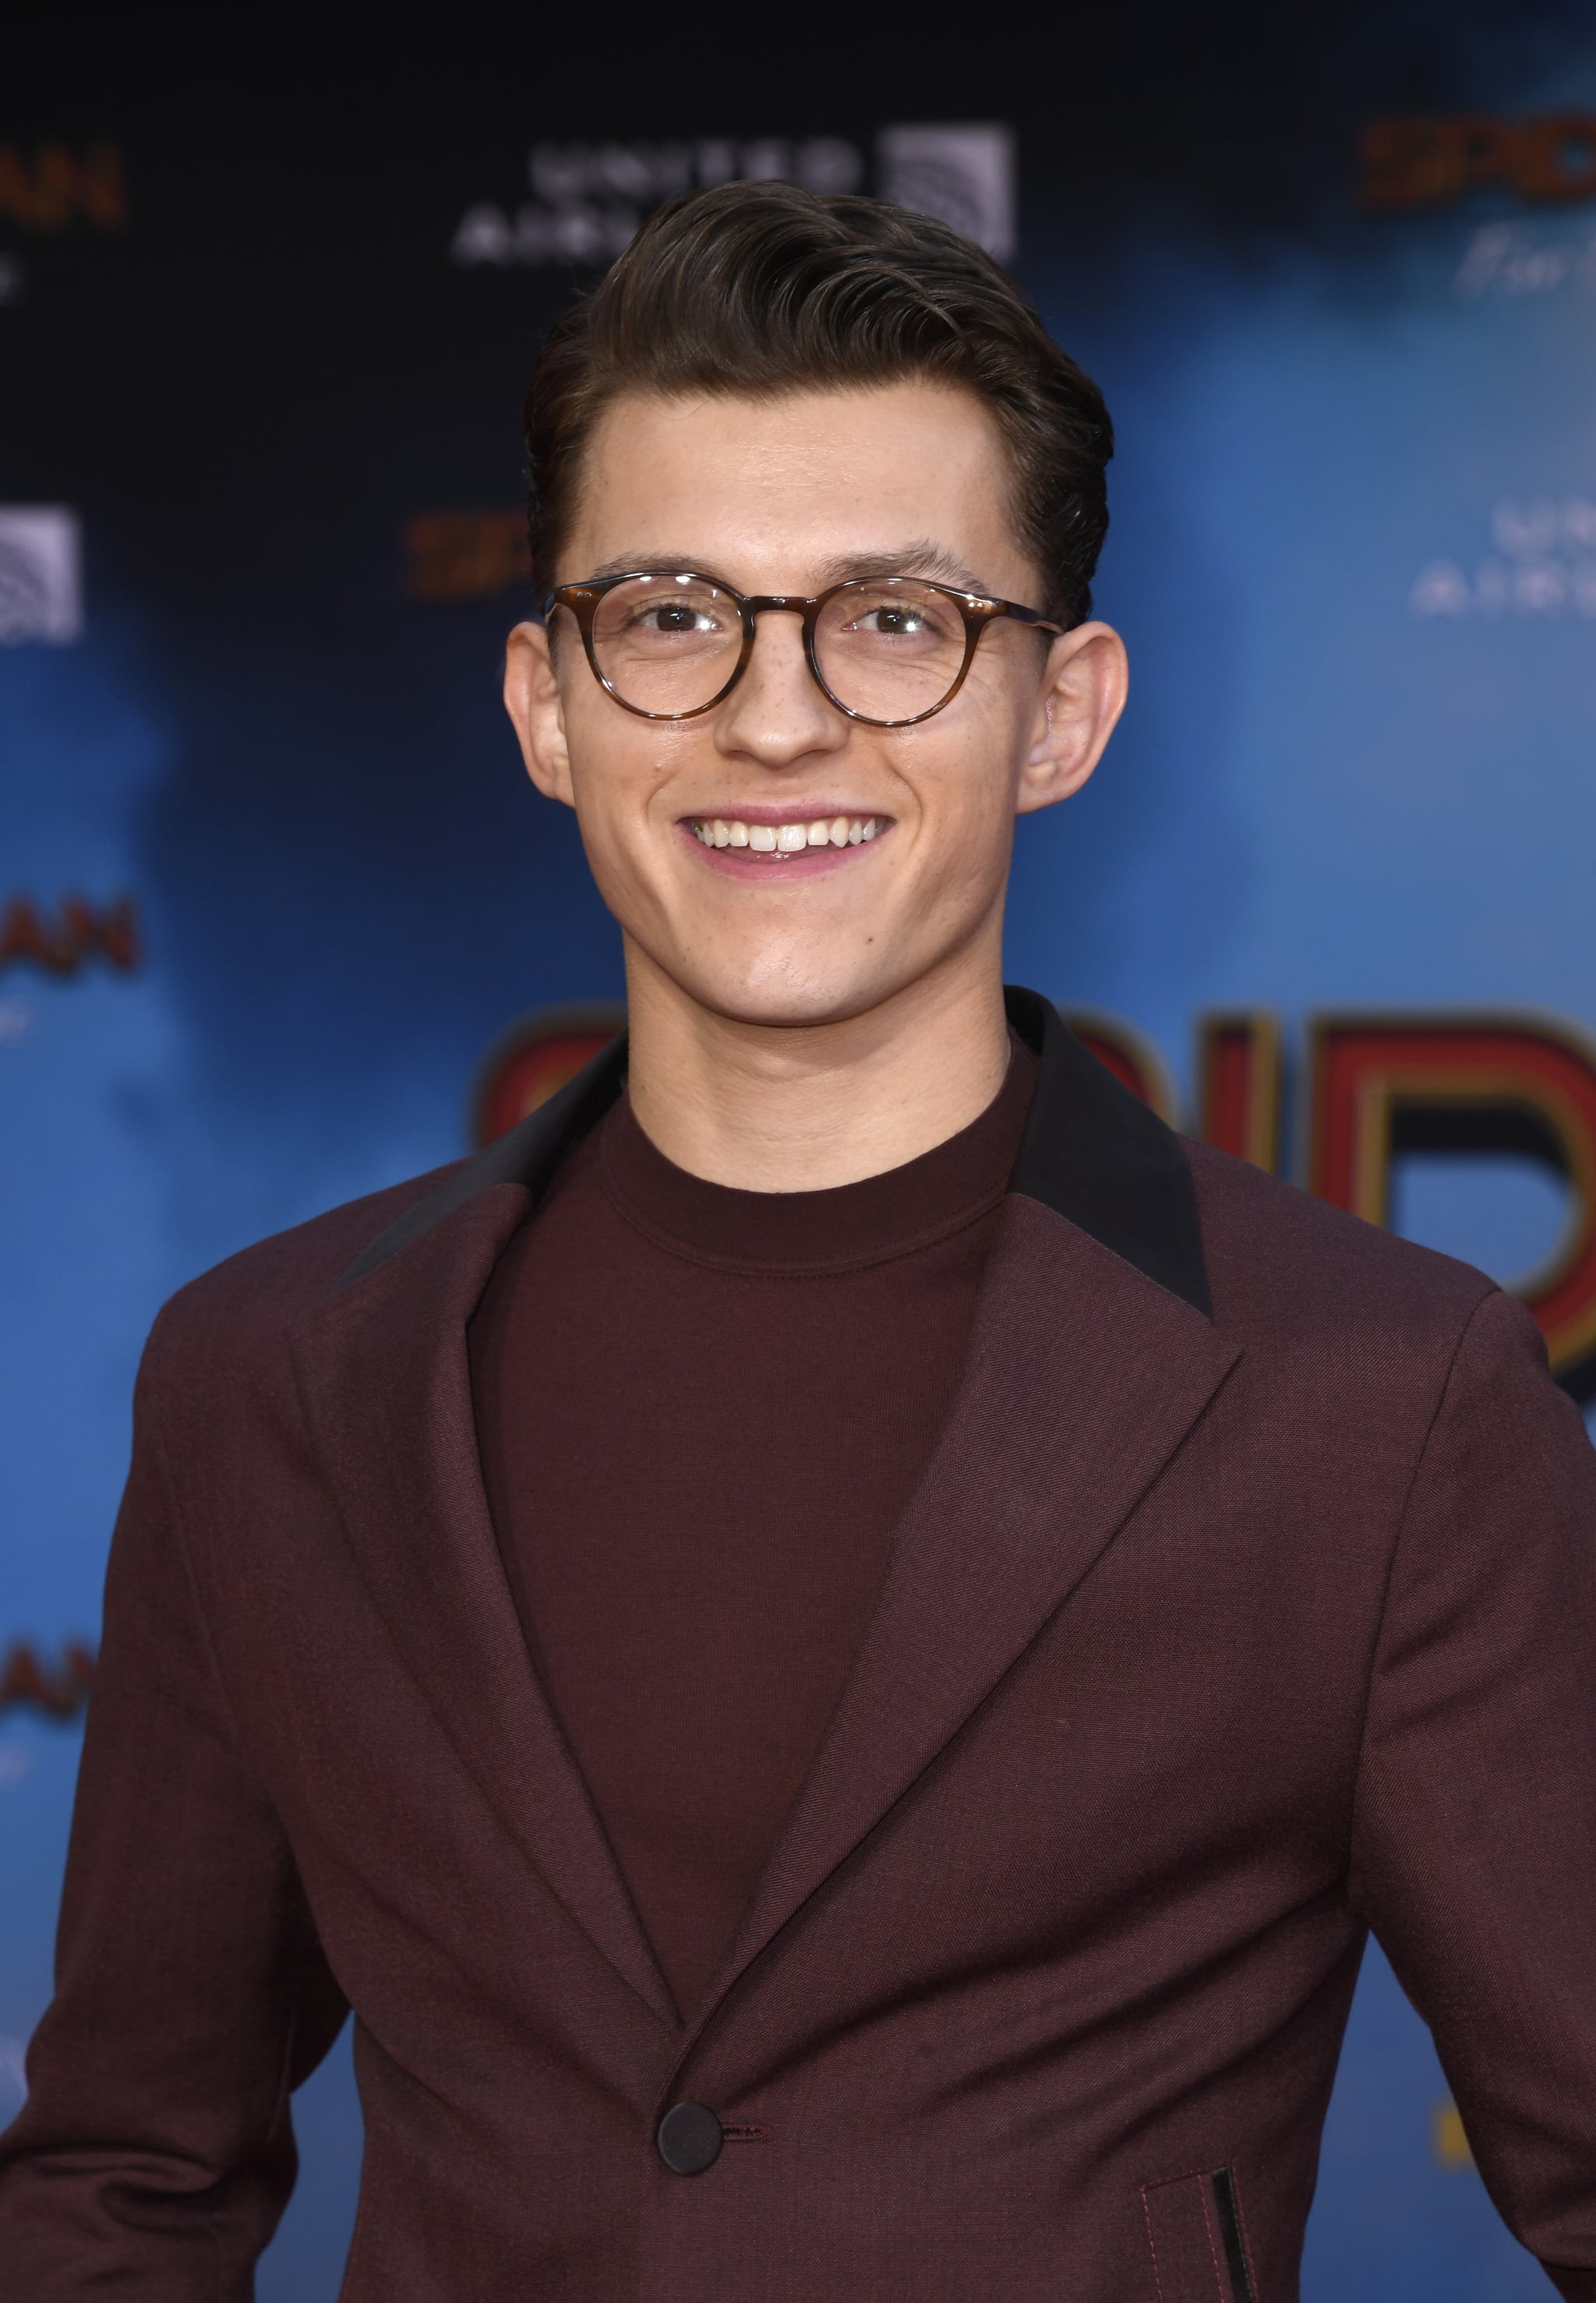 Does anyone know the name of Bubniak/Peter's haircut? : r/Spiderman